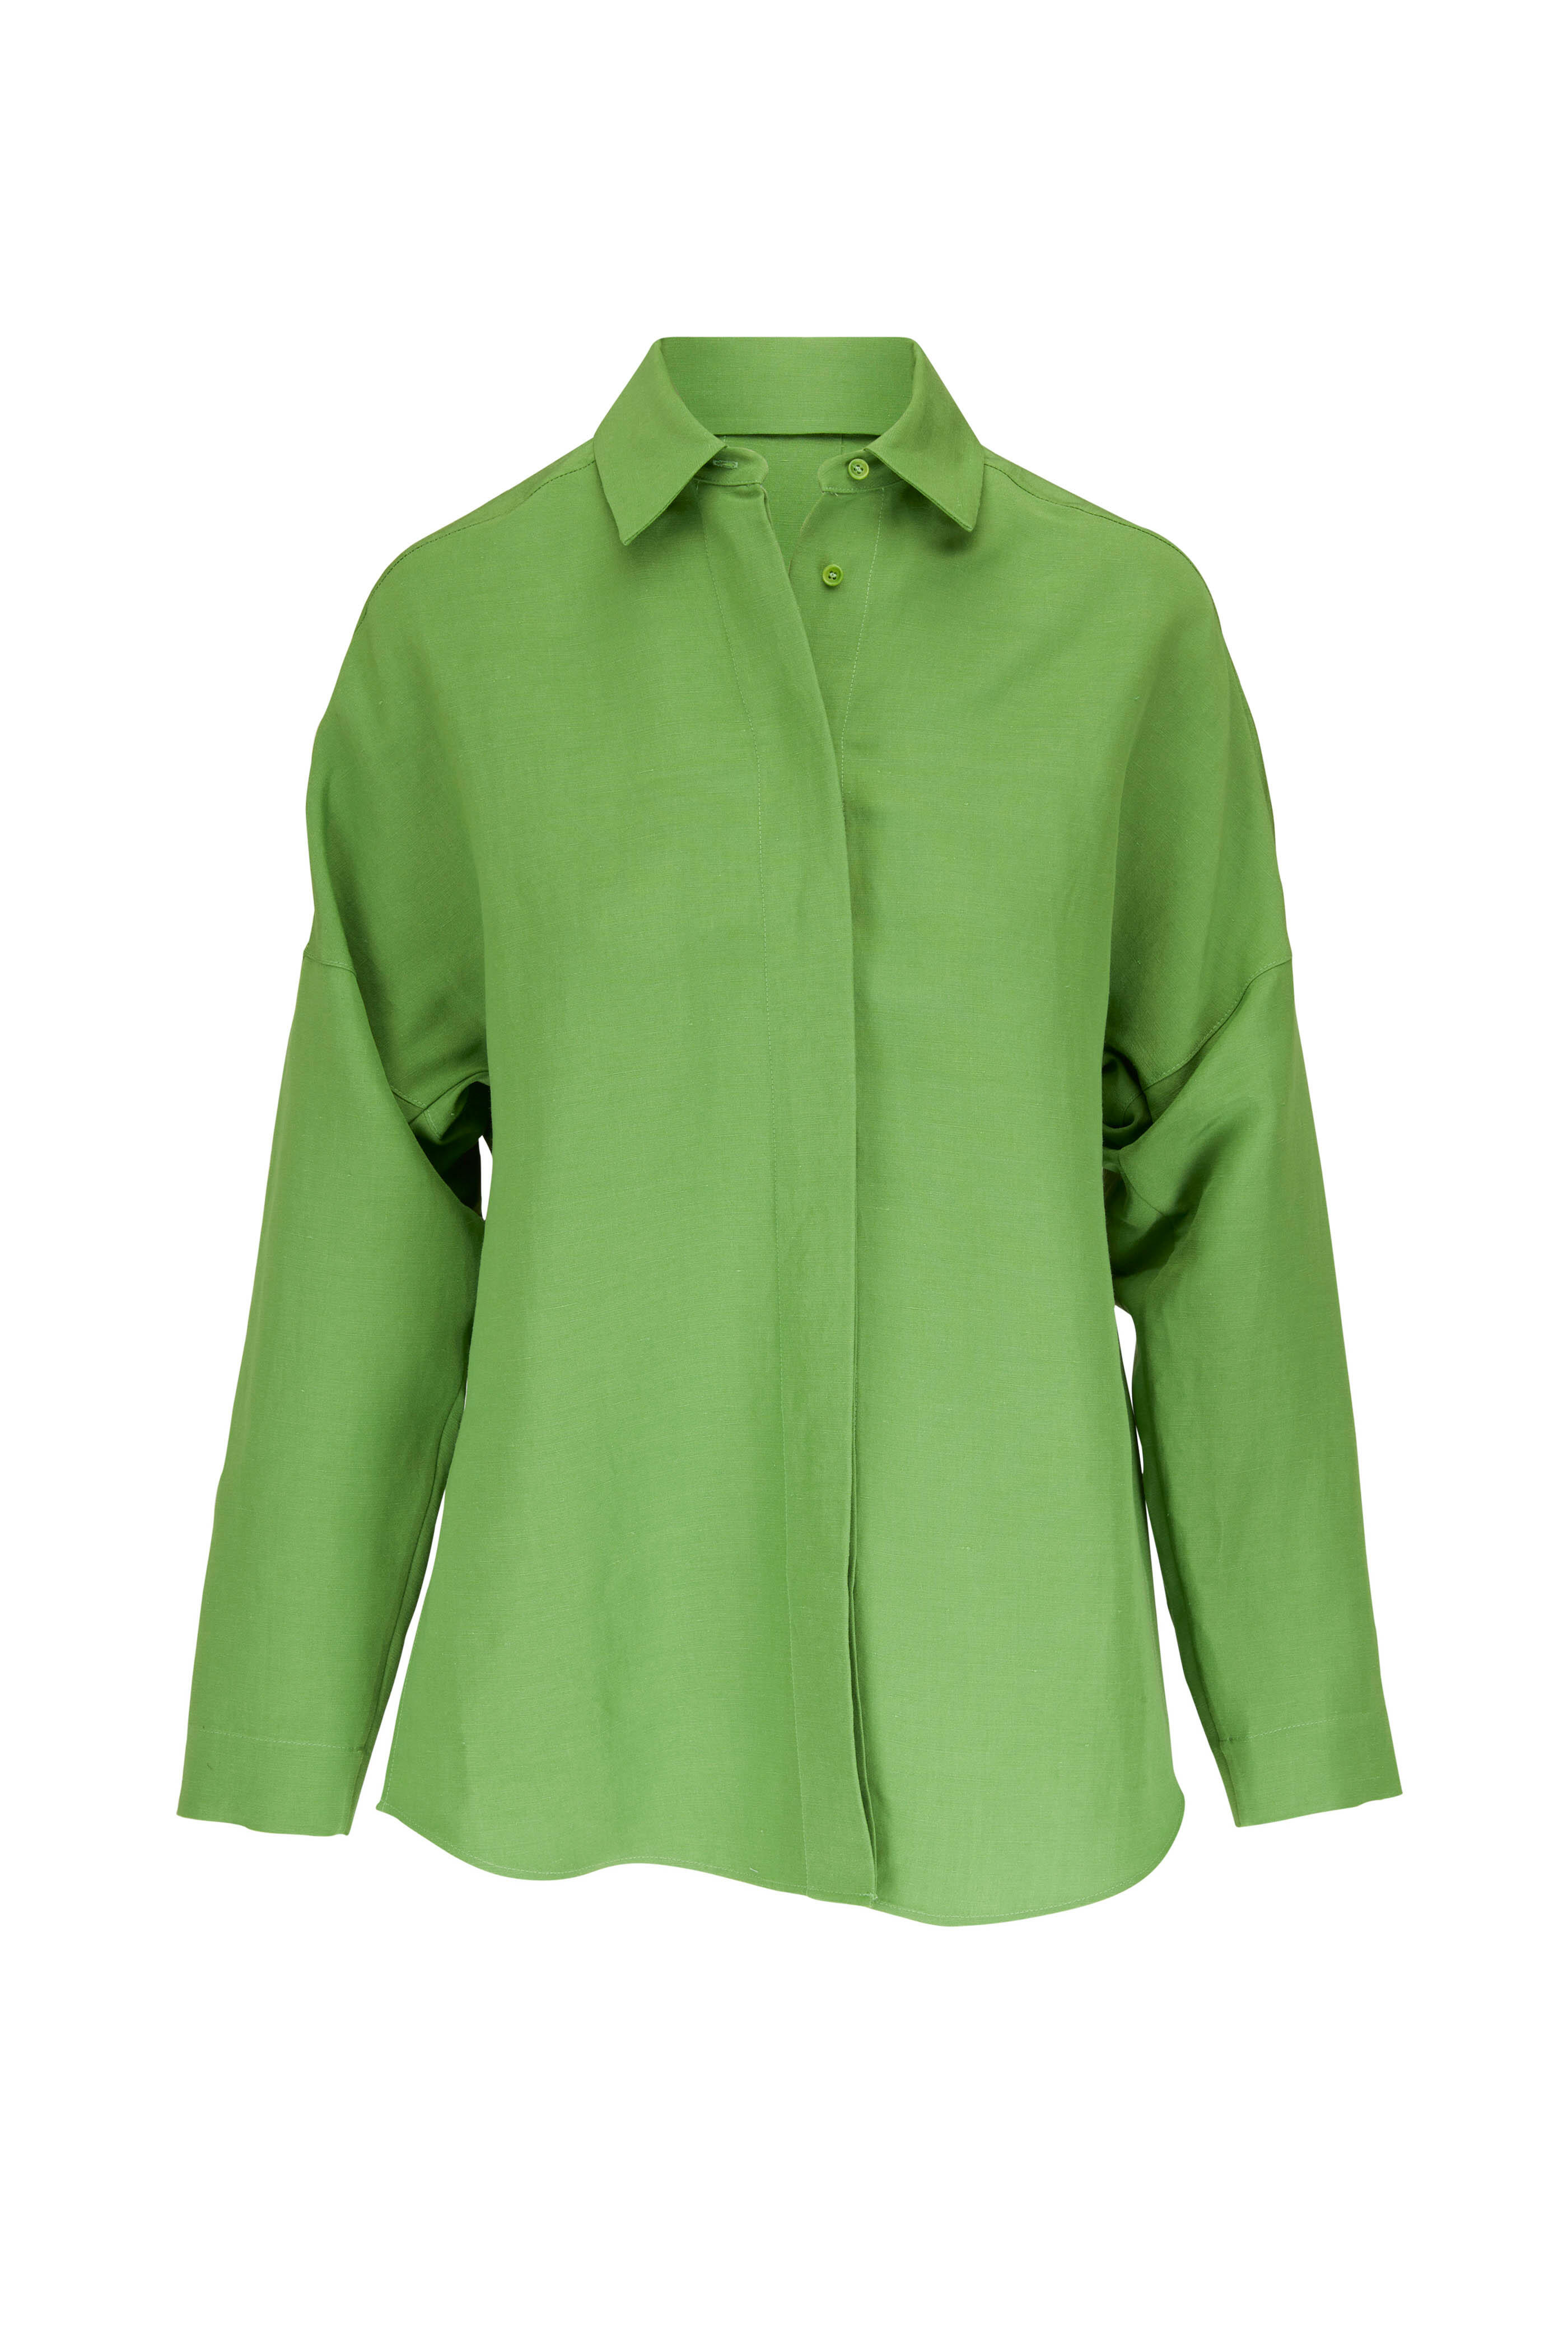 Akris Punto - Green Stretch Linen Relaxed Fit Blouse